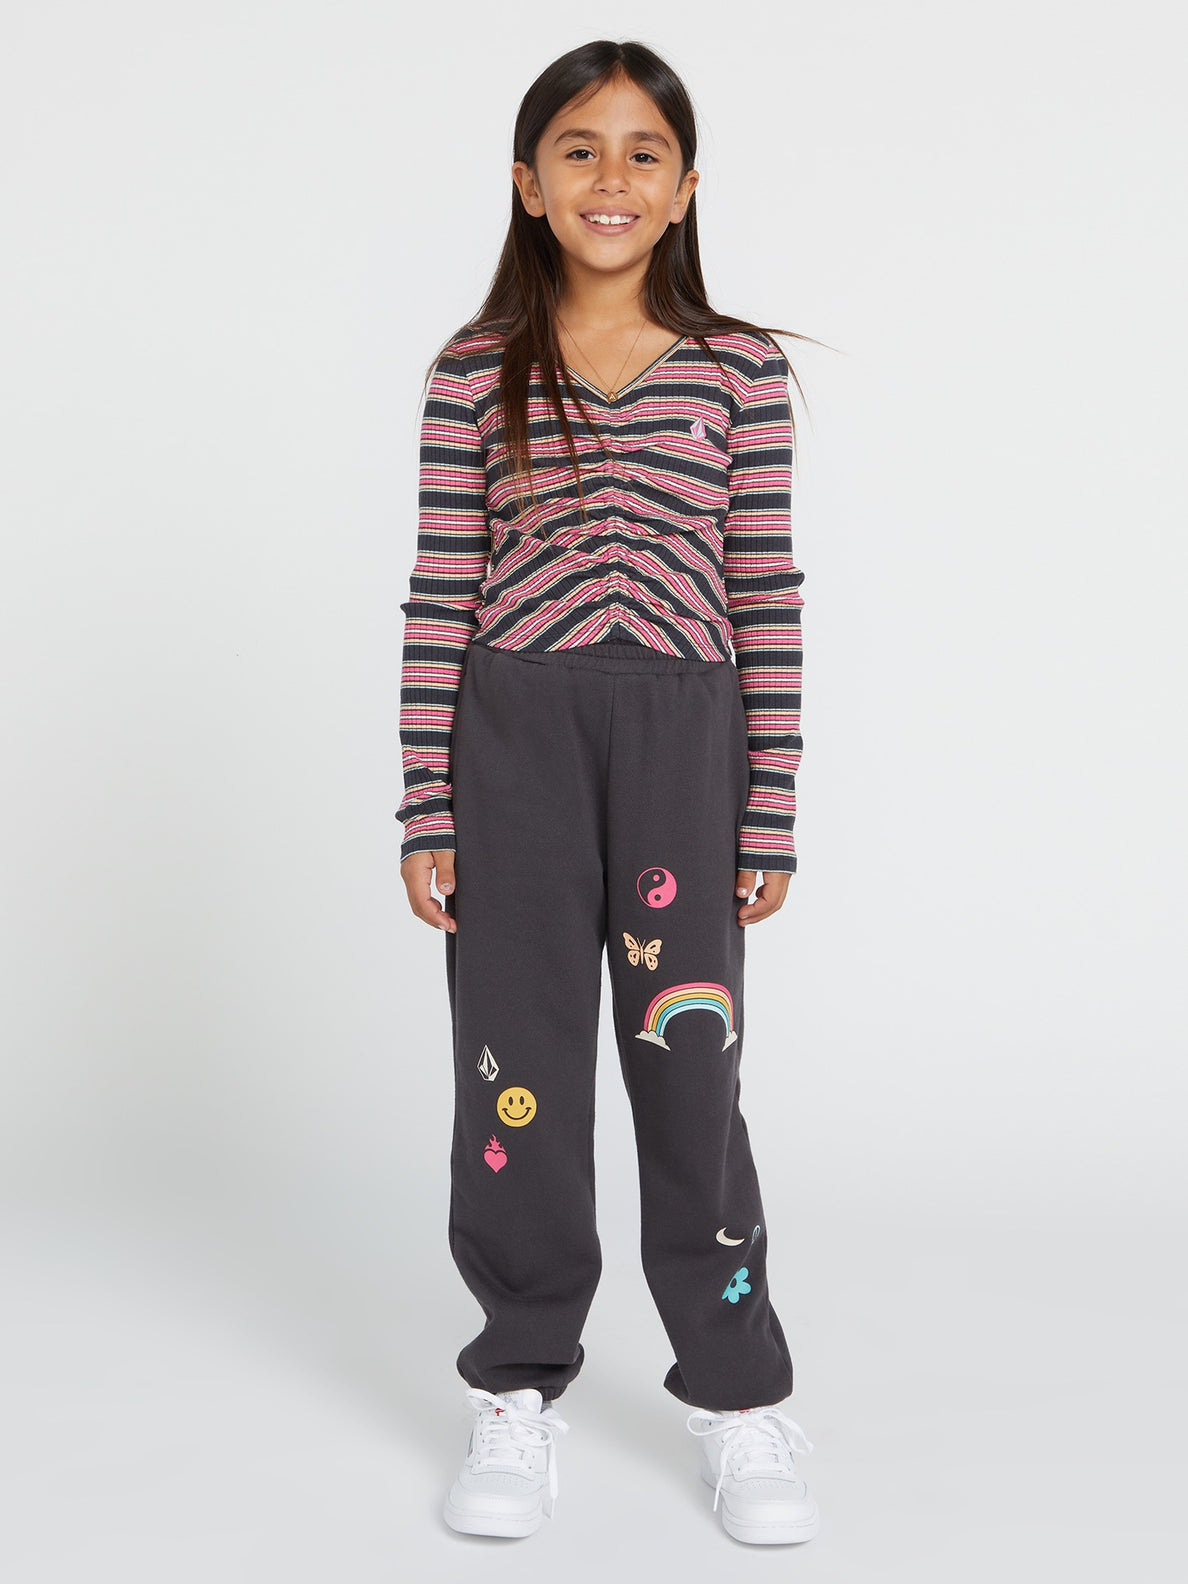 Girls Truly Stoked Pant - Vintage Black